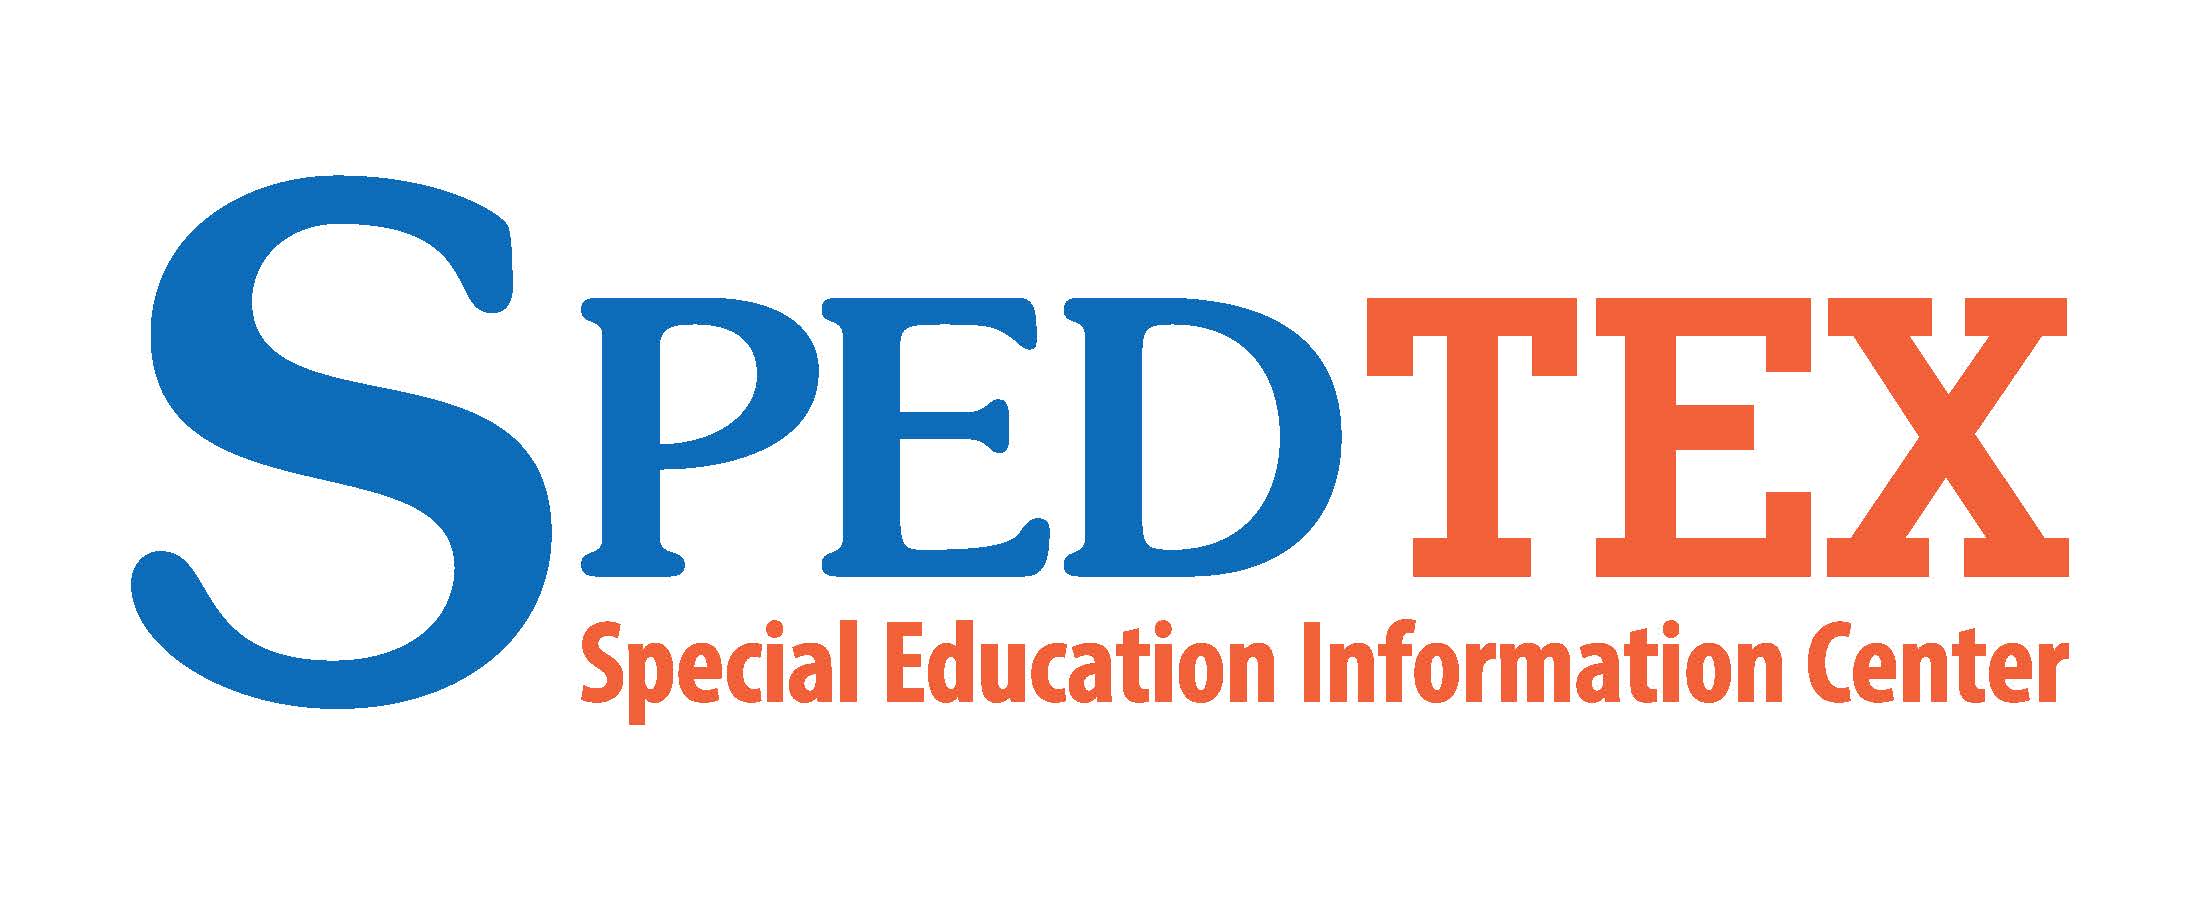 SPEDTX special education information logo blue and orange